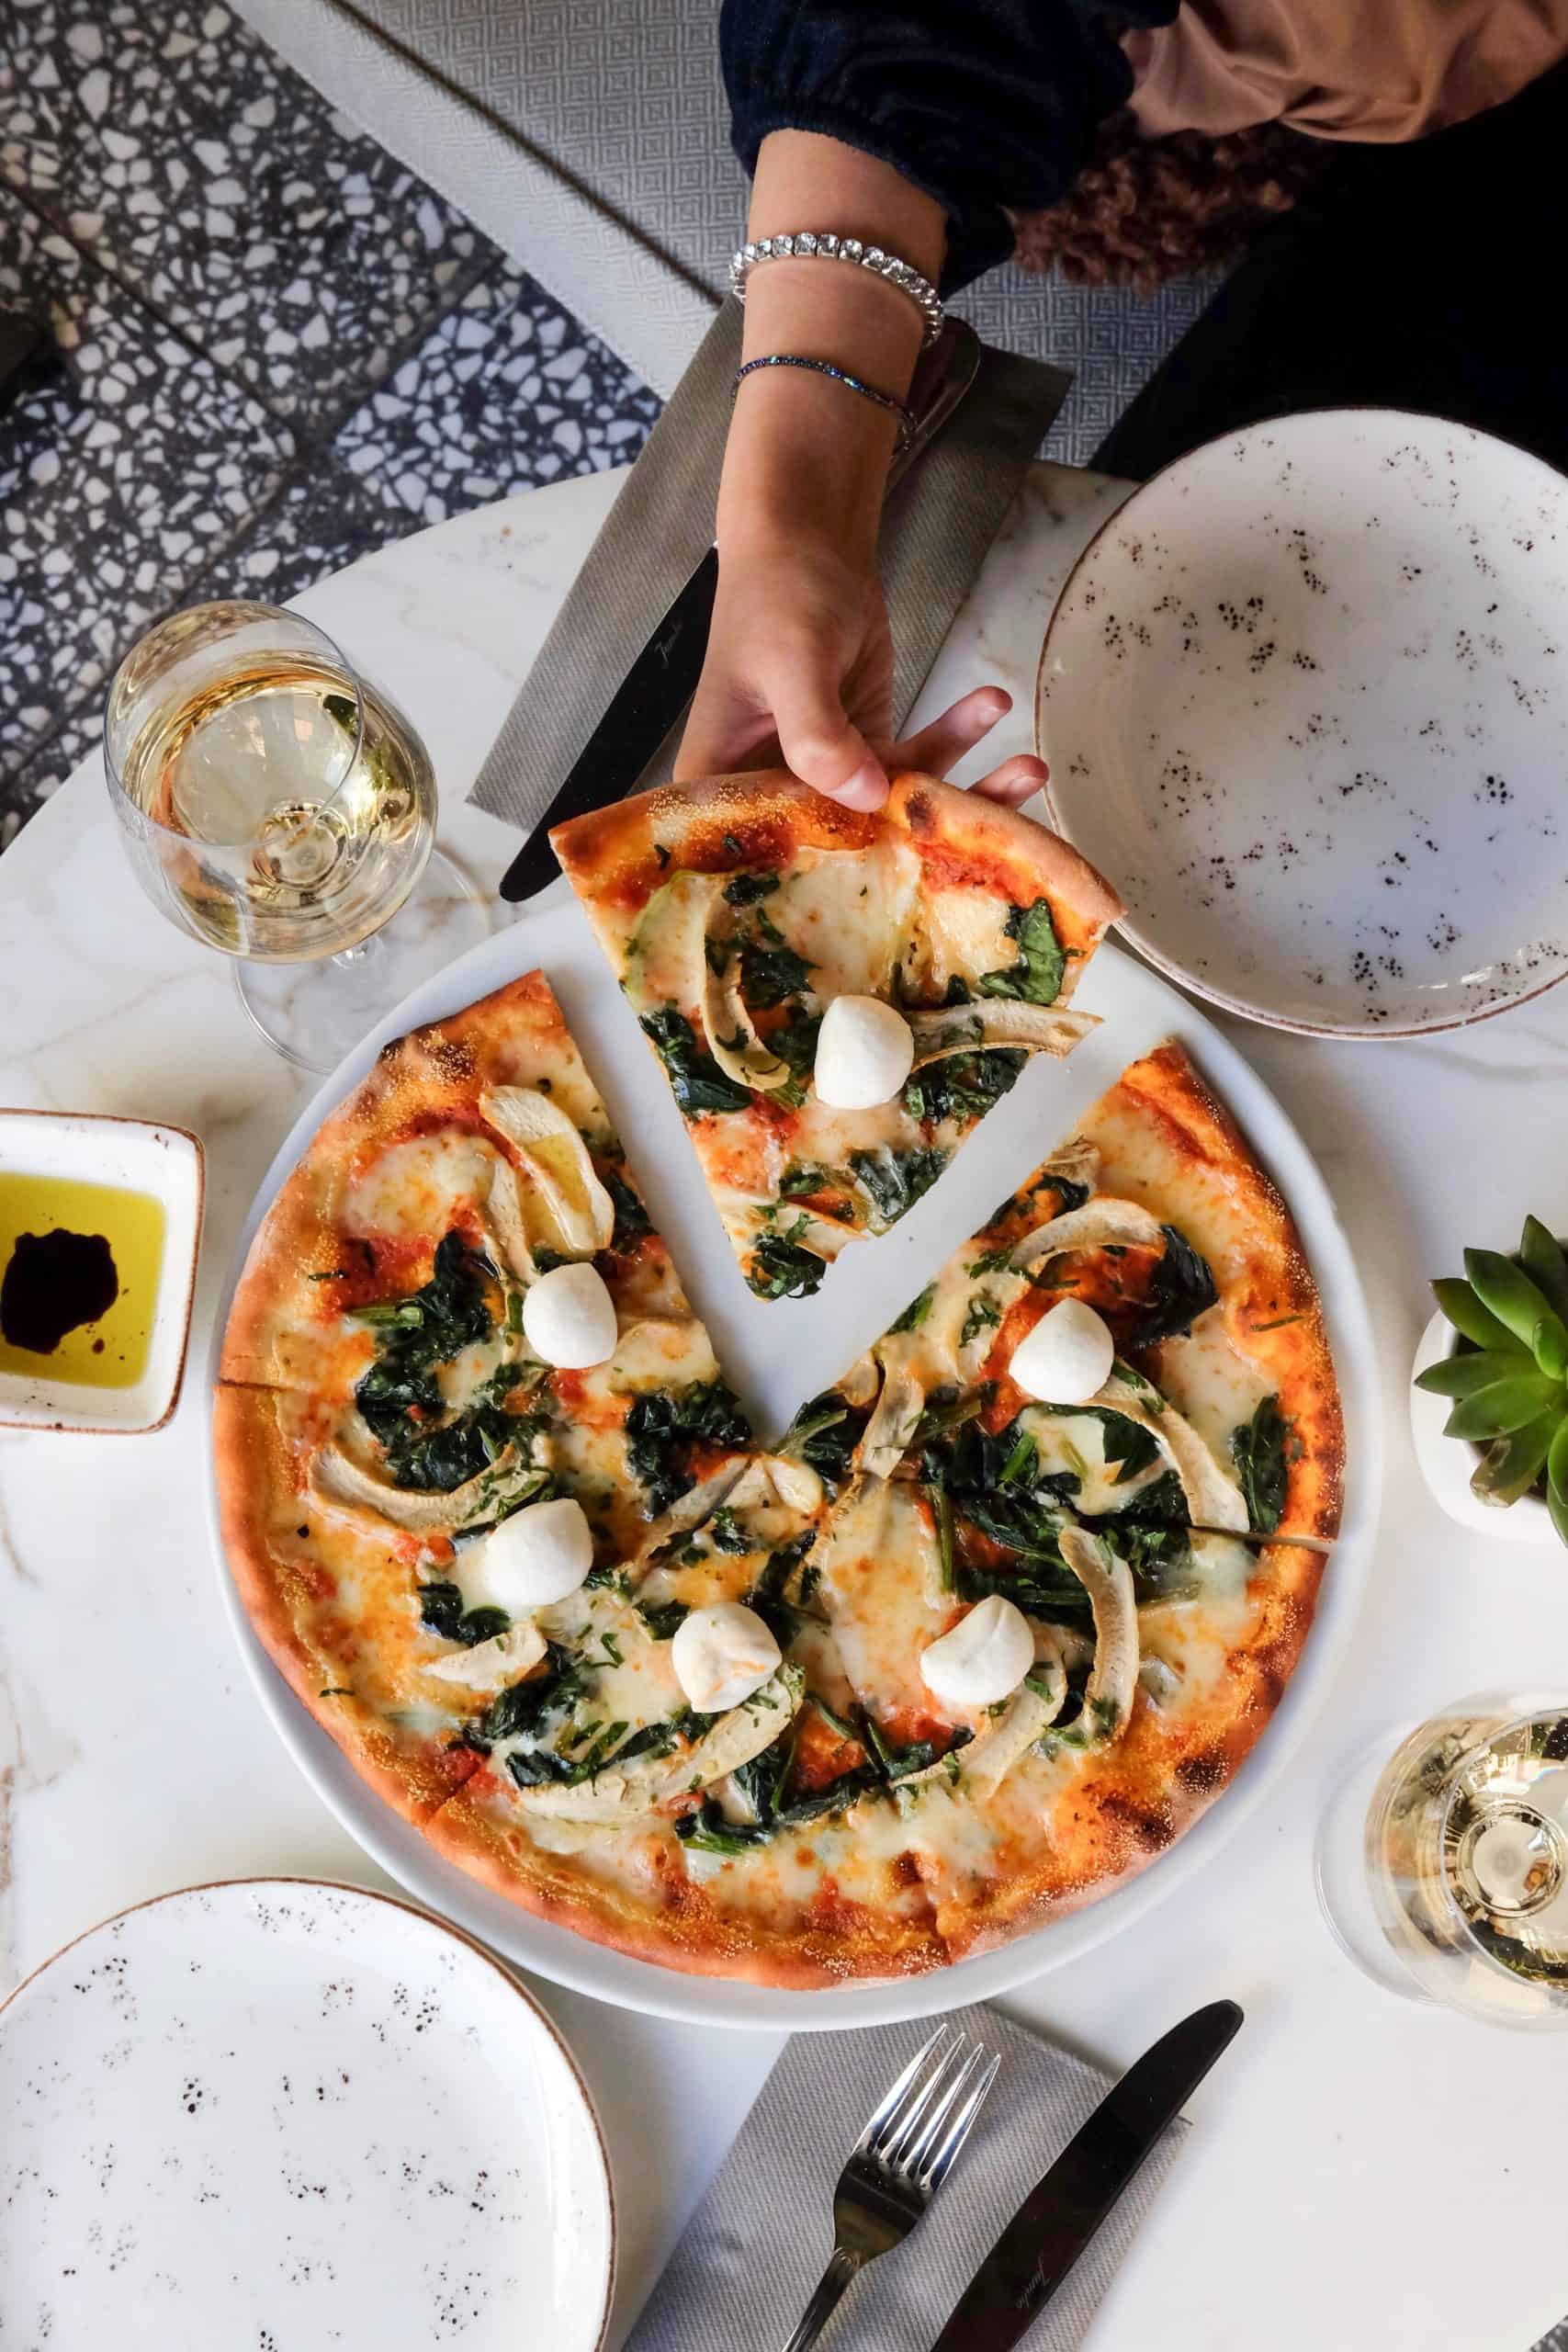 large pizza on a table with a woman who has made peace with pizza and has permission to eat all foods taking a slice of pizza off the plate. Pizza surrounded by two empty white plates with black speckles, two glasses of white wine, some silverware and dish of olive oil and balsamic vinegar.